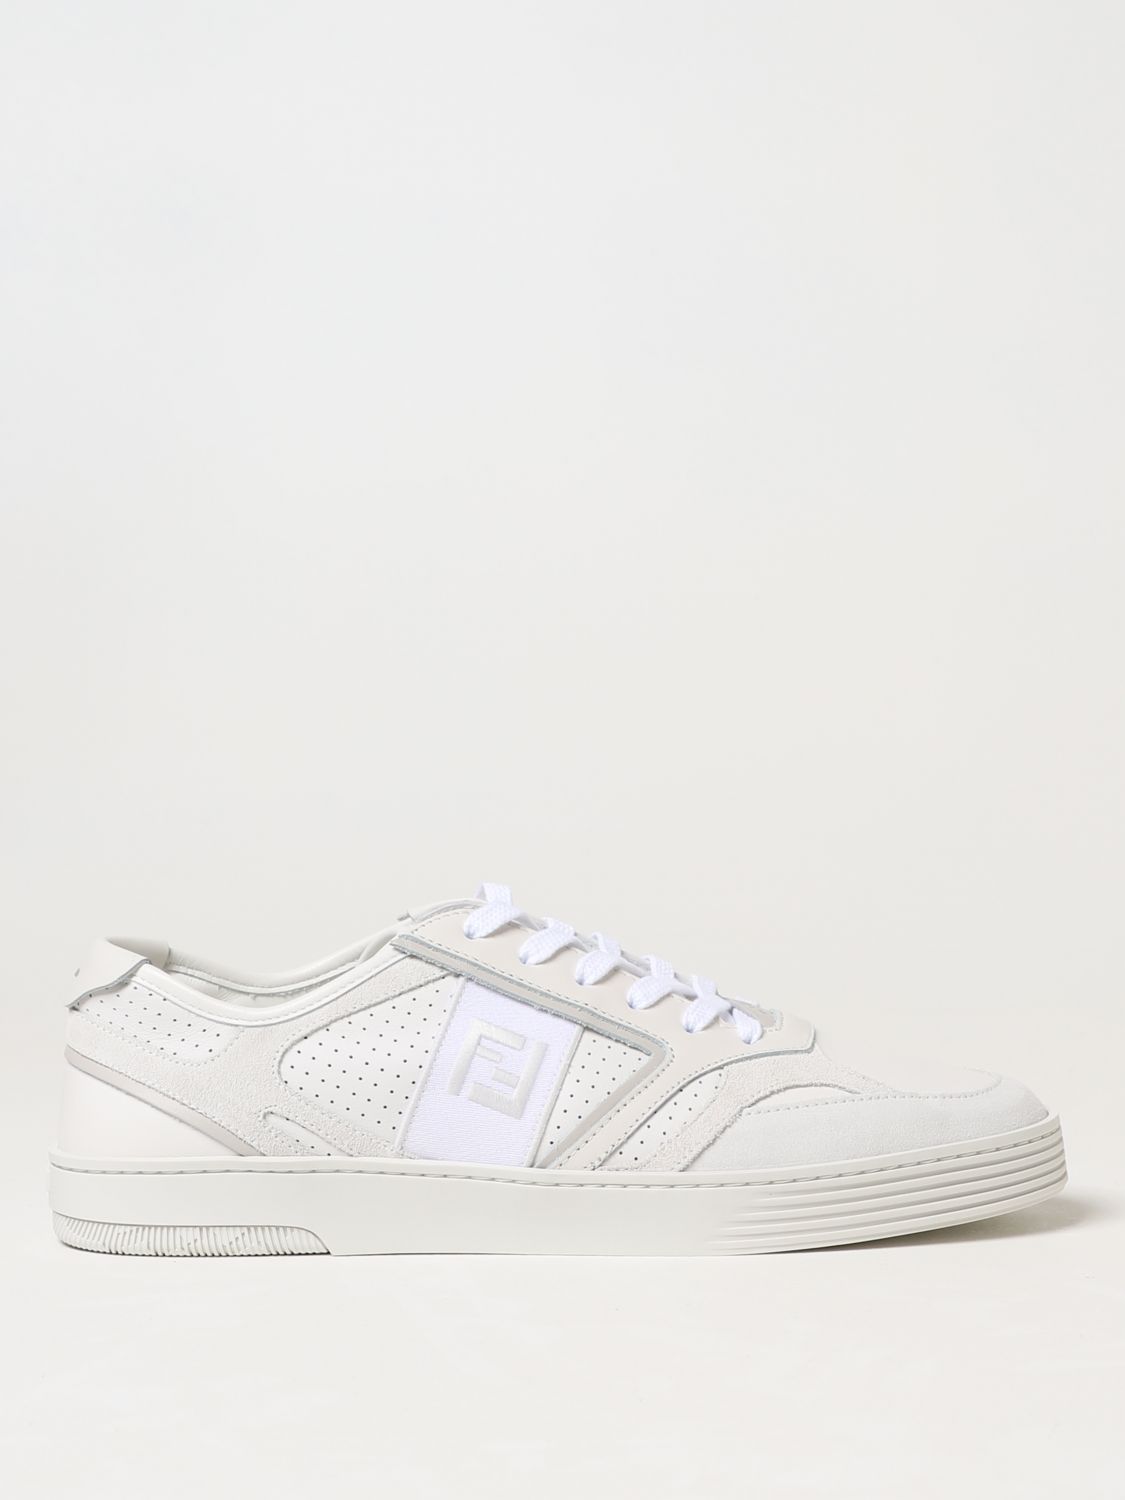 FENDI STEP SNEAKERS IN LEATHER WITH EMBROIDERED FF MONOGRAM,392248001